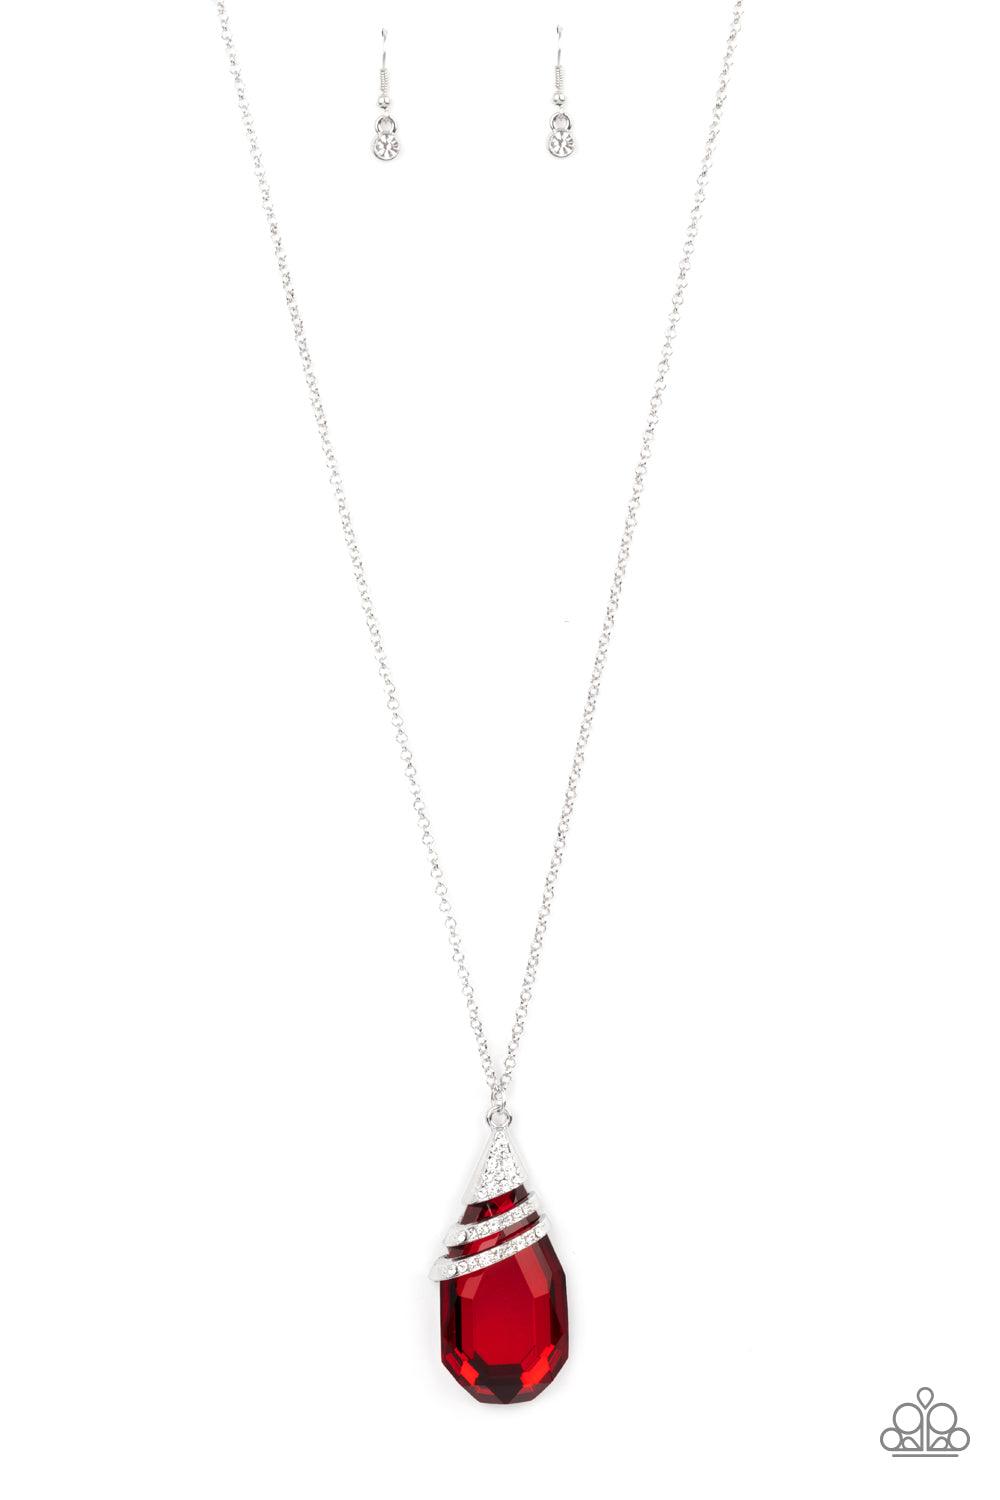 Paparazzi Accessories Demandingly Diva - Red Capped in a white rhinestone encrusted fitting, glittery silver ribbons of white rhinestones delicately wrap around the top of a dramatically oversized red teardrop gem. The fiery red pendant swings from the bo